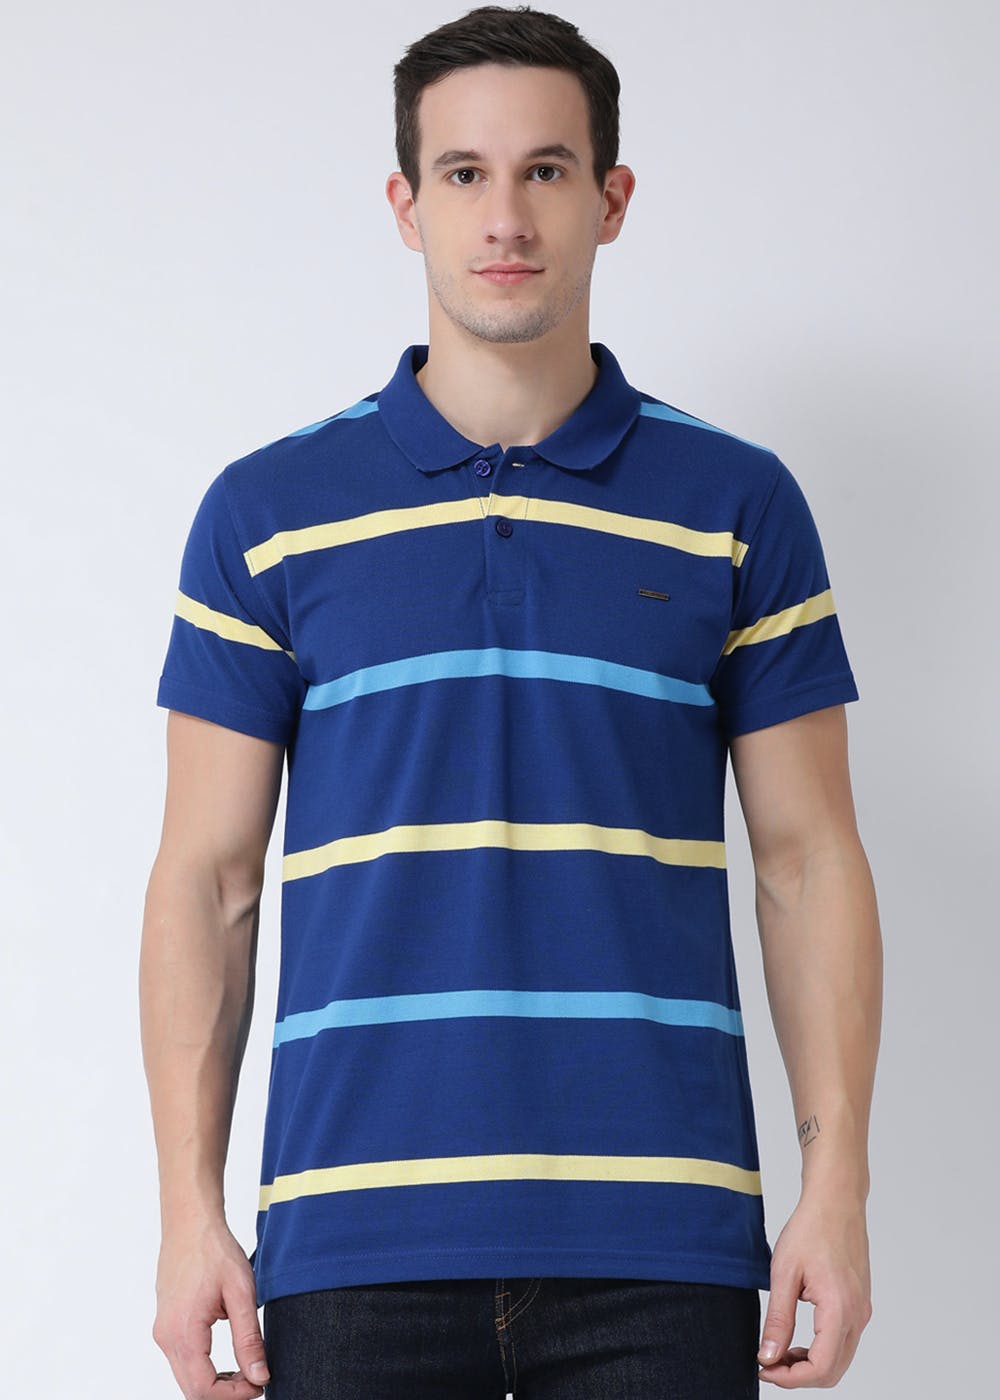 Get Two-Tone Striped Blue Polo T-Shirt at ₹ 799 | LBB Shop